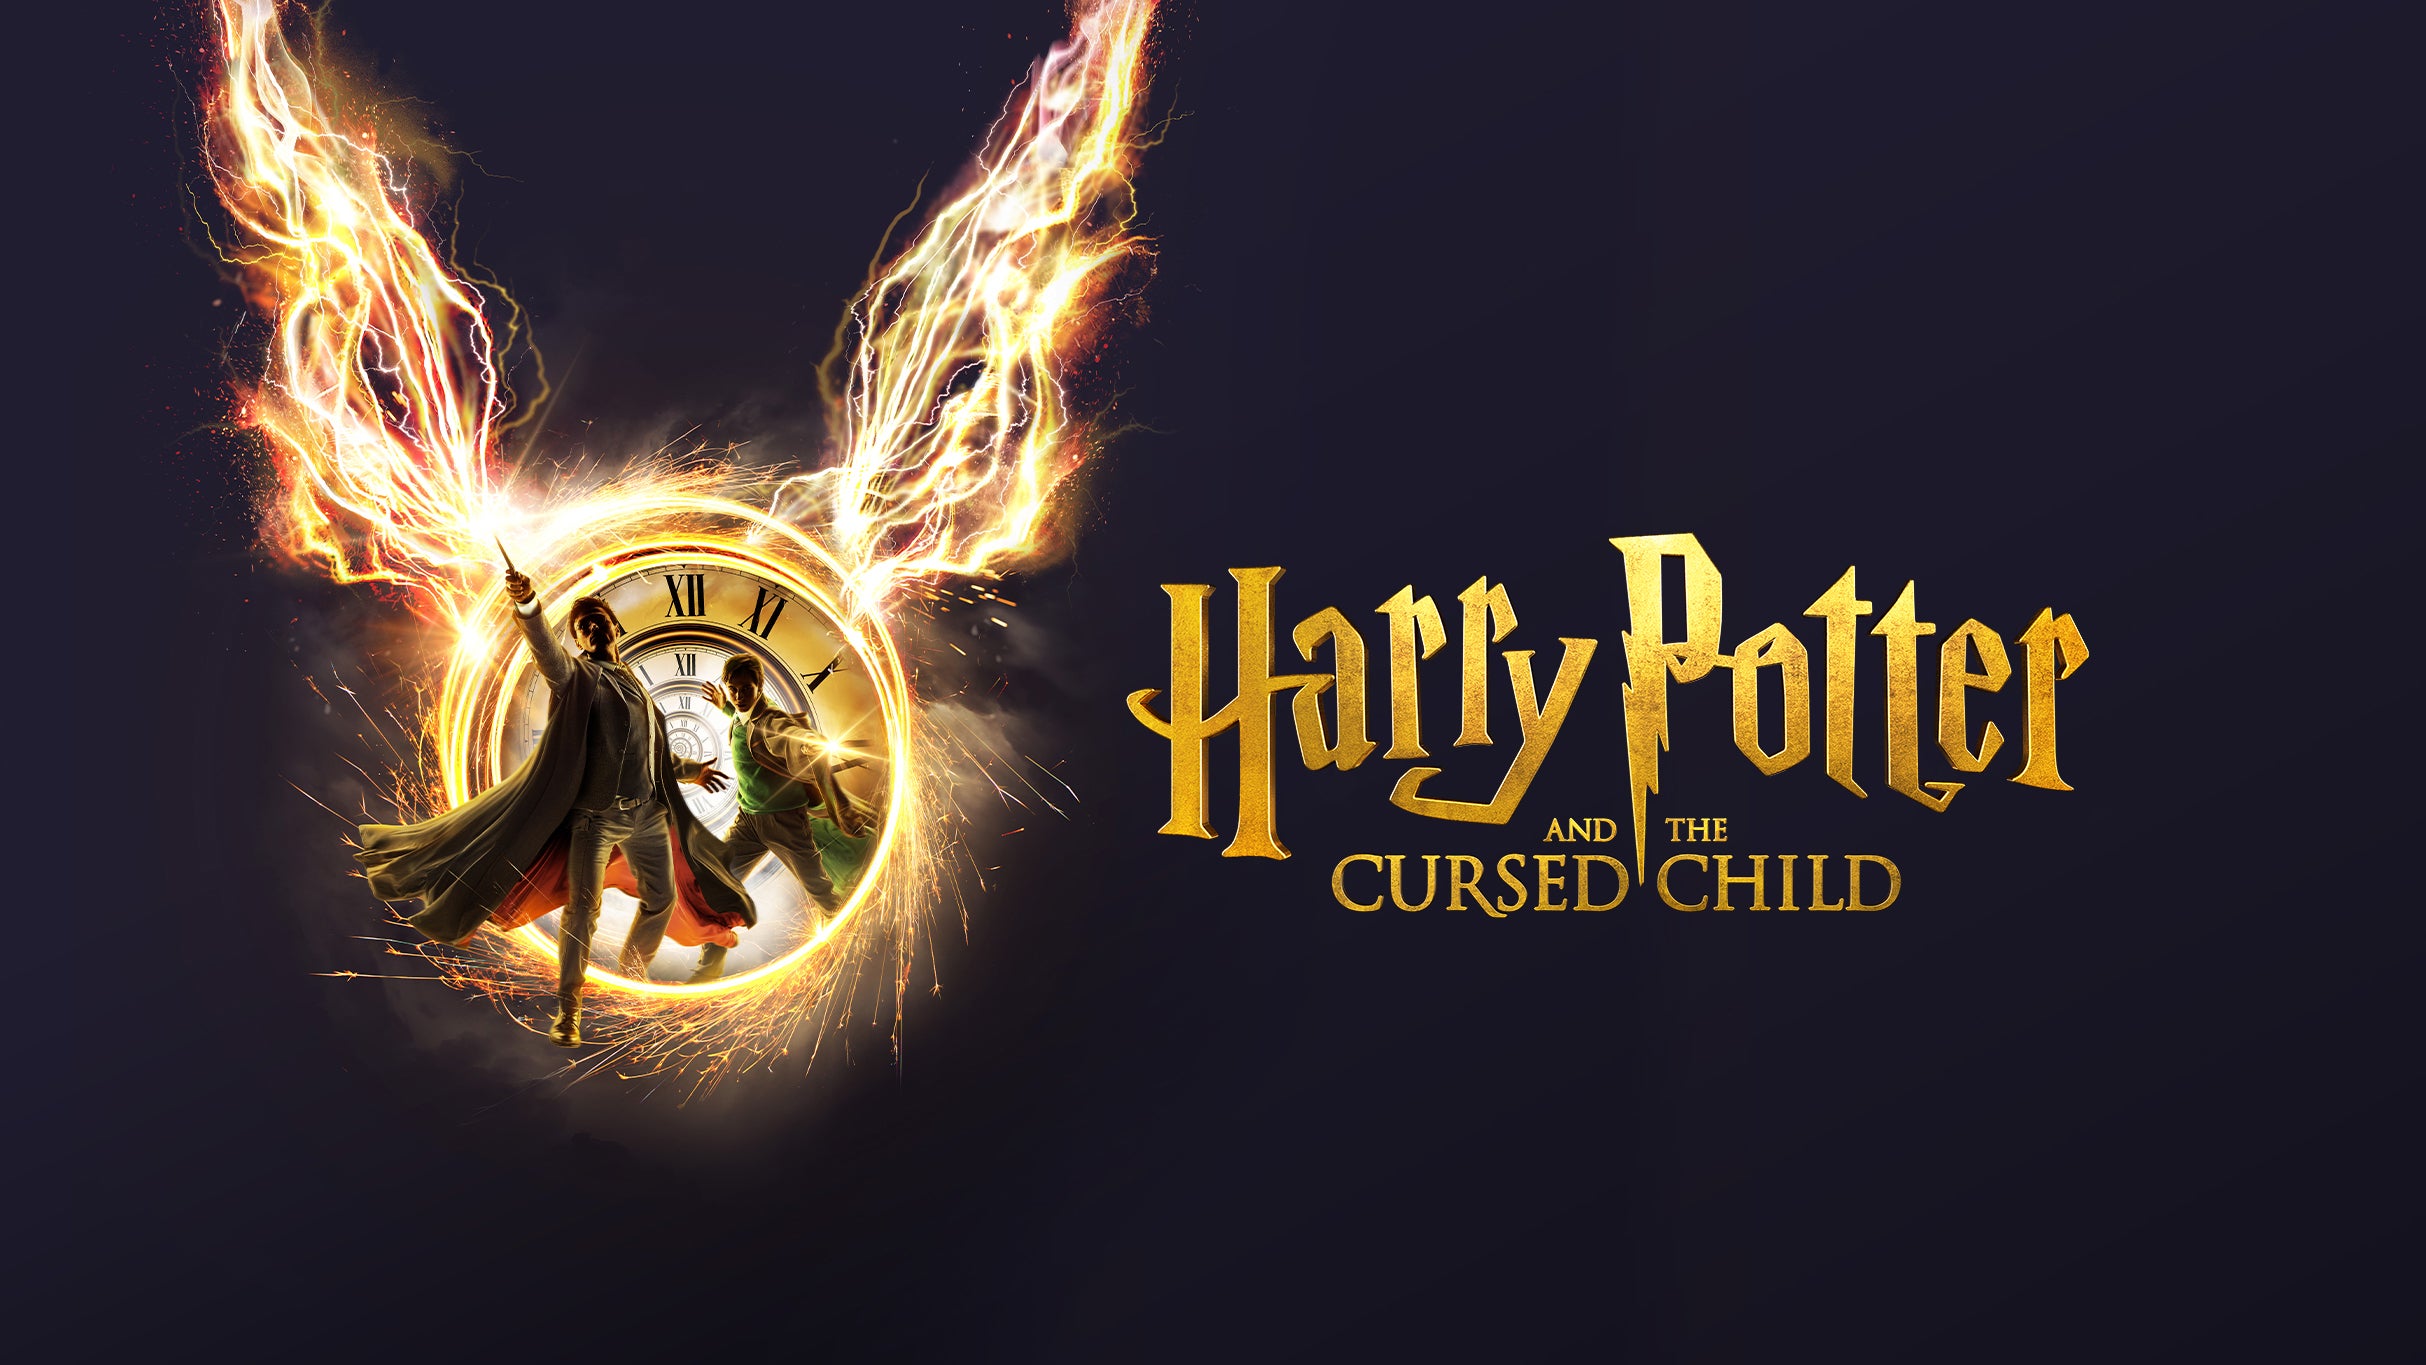 Harry Potter and the Cursed Child (Chicago) in Chicago promo photo for Internet presale offer code